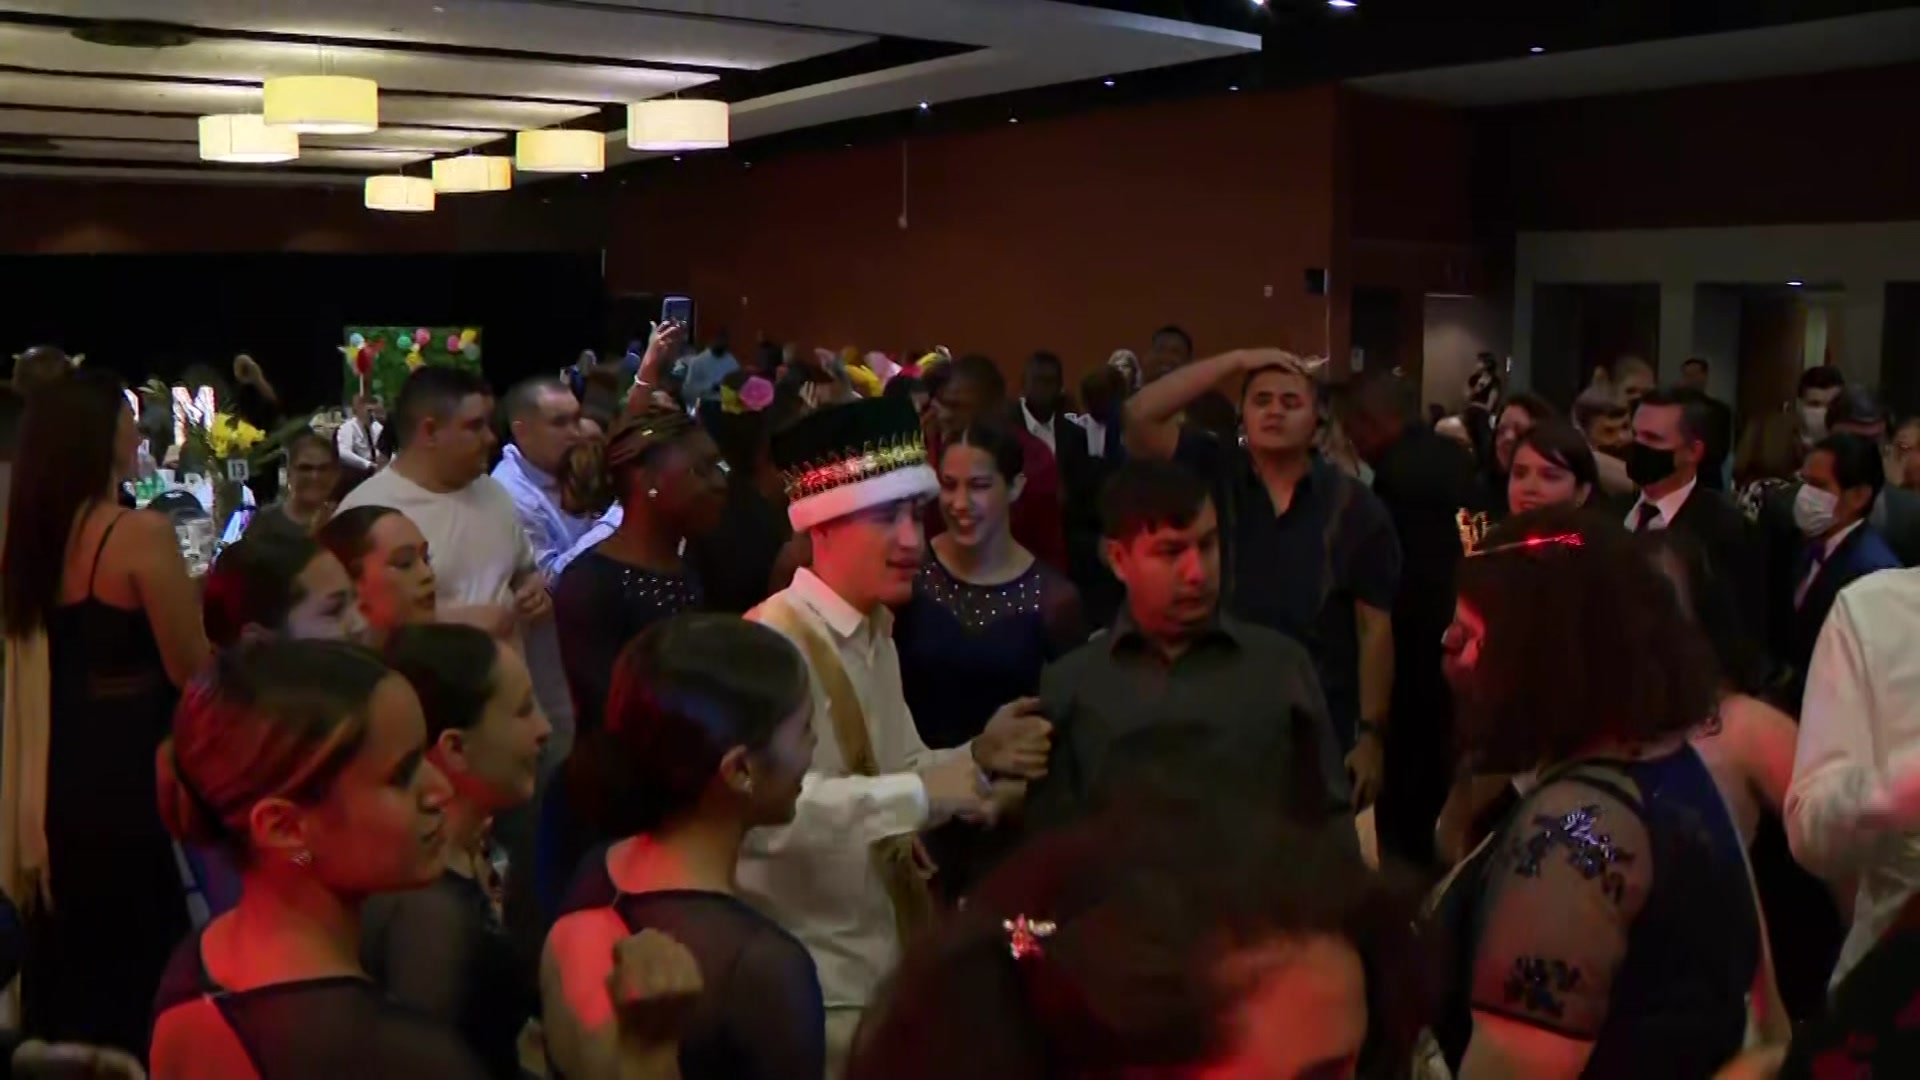 ‘Feeling Grateful, Feeling Pride:’ Miami-Dade Students Have Grand Time, Celebrate Special Abilities At Prom